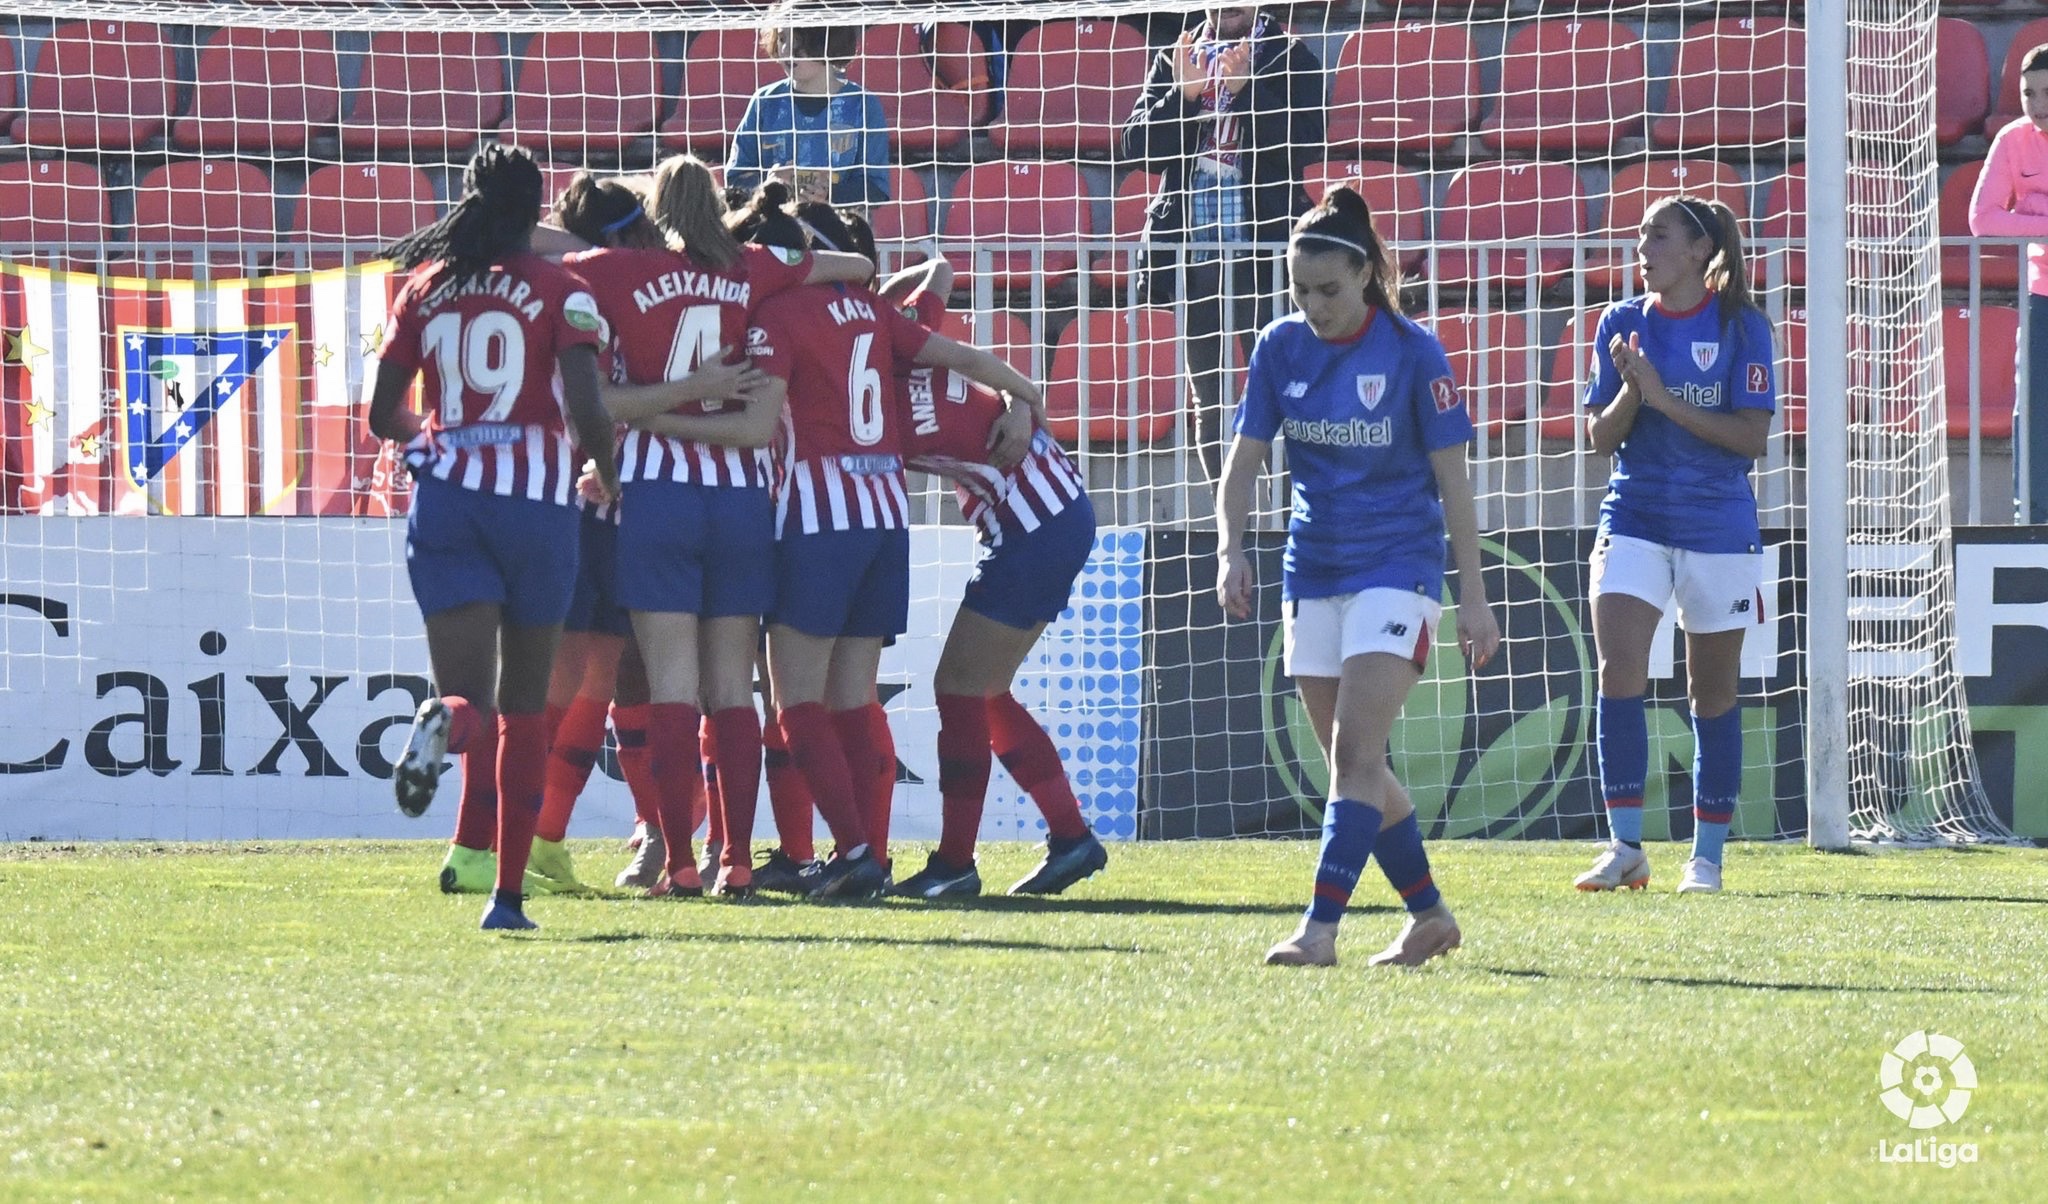 The Athletic Club for women has lost 3-0 against Atlético de Madrid.